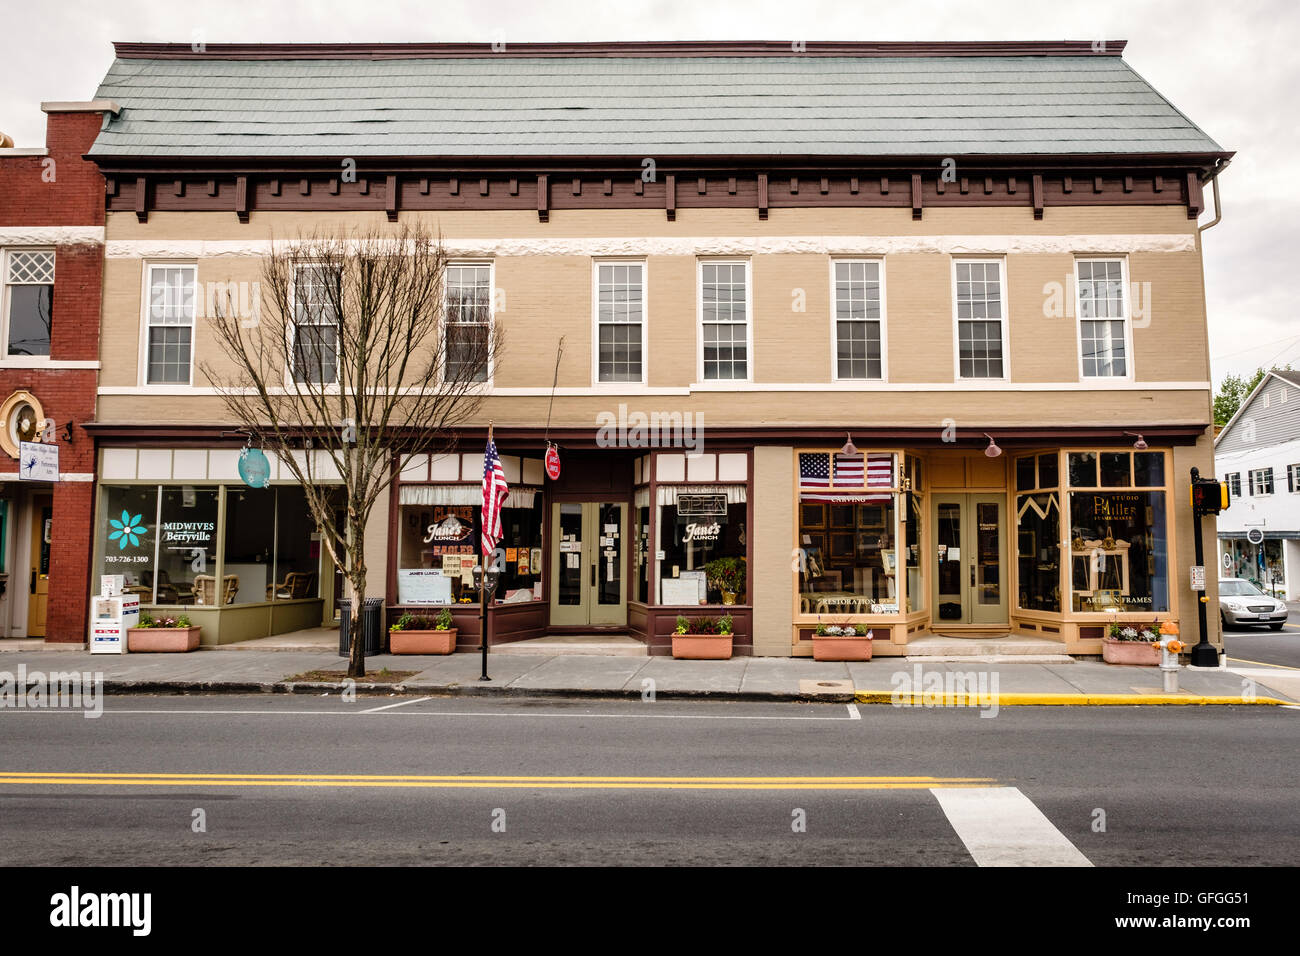 Three stores in single Victorian commercial building, East Main Street, Berryville, Virginia Stock Photo